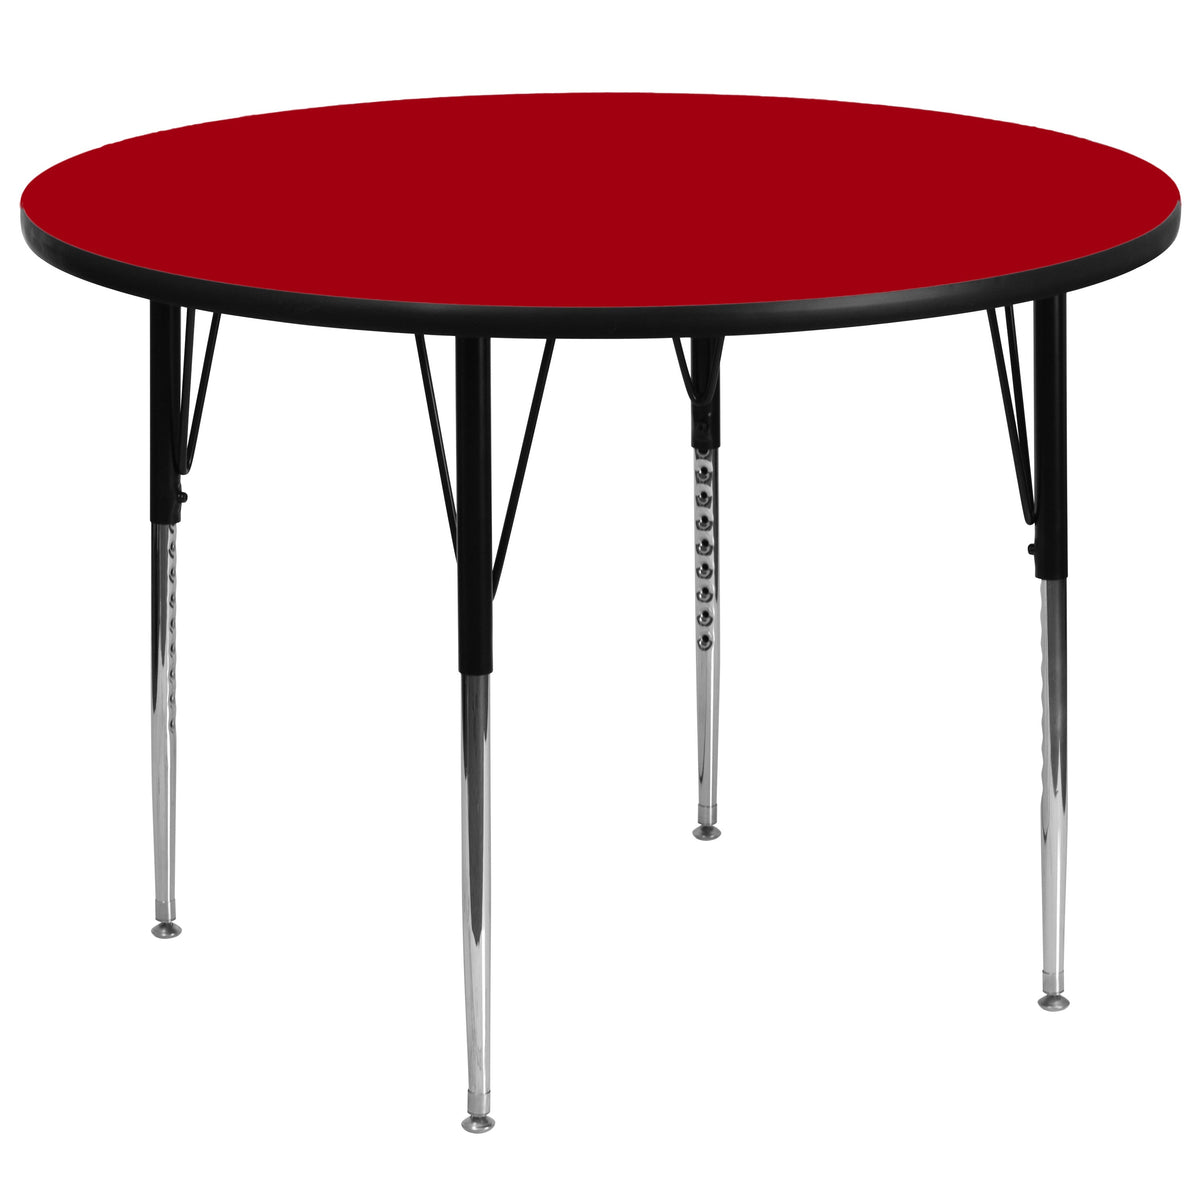 Red |#| 60inch Round Red Thermal Laminate Activity Table - Standard Height Adjustable Legs